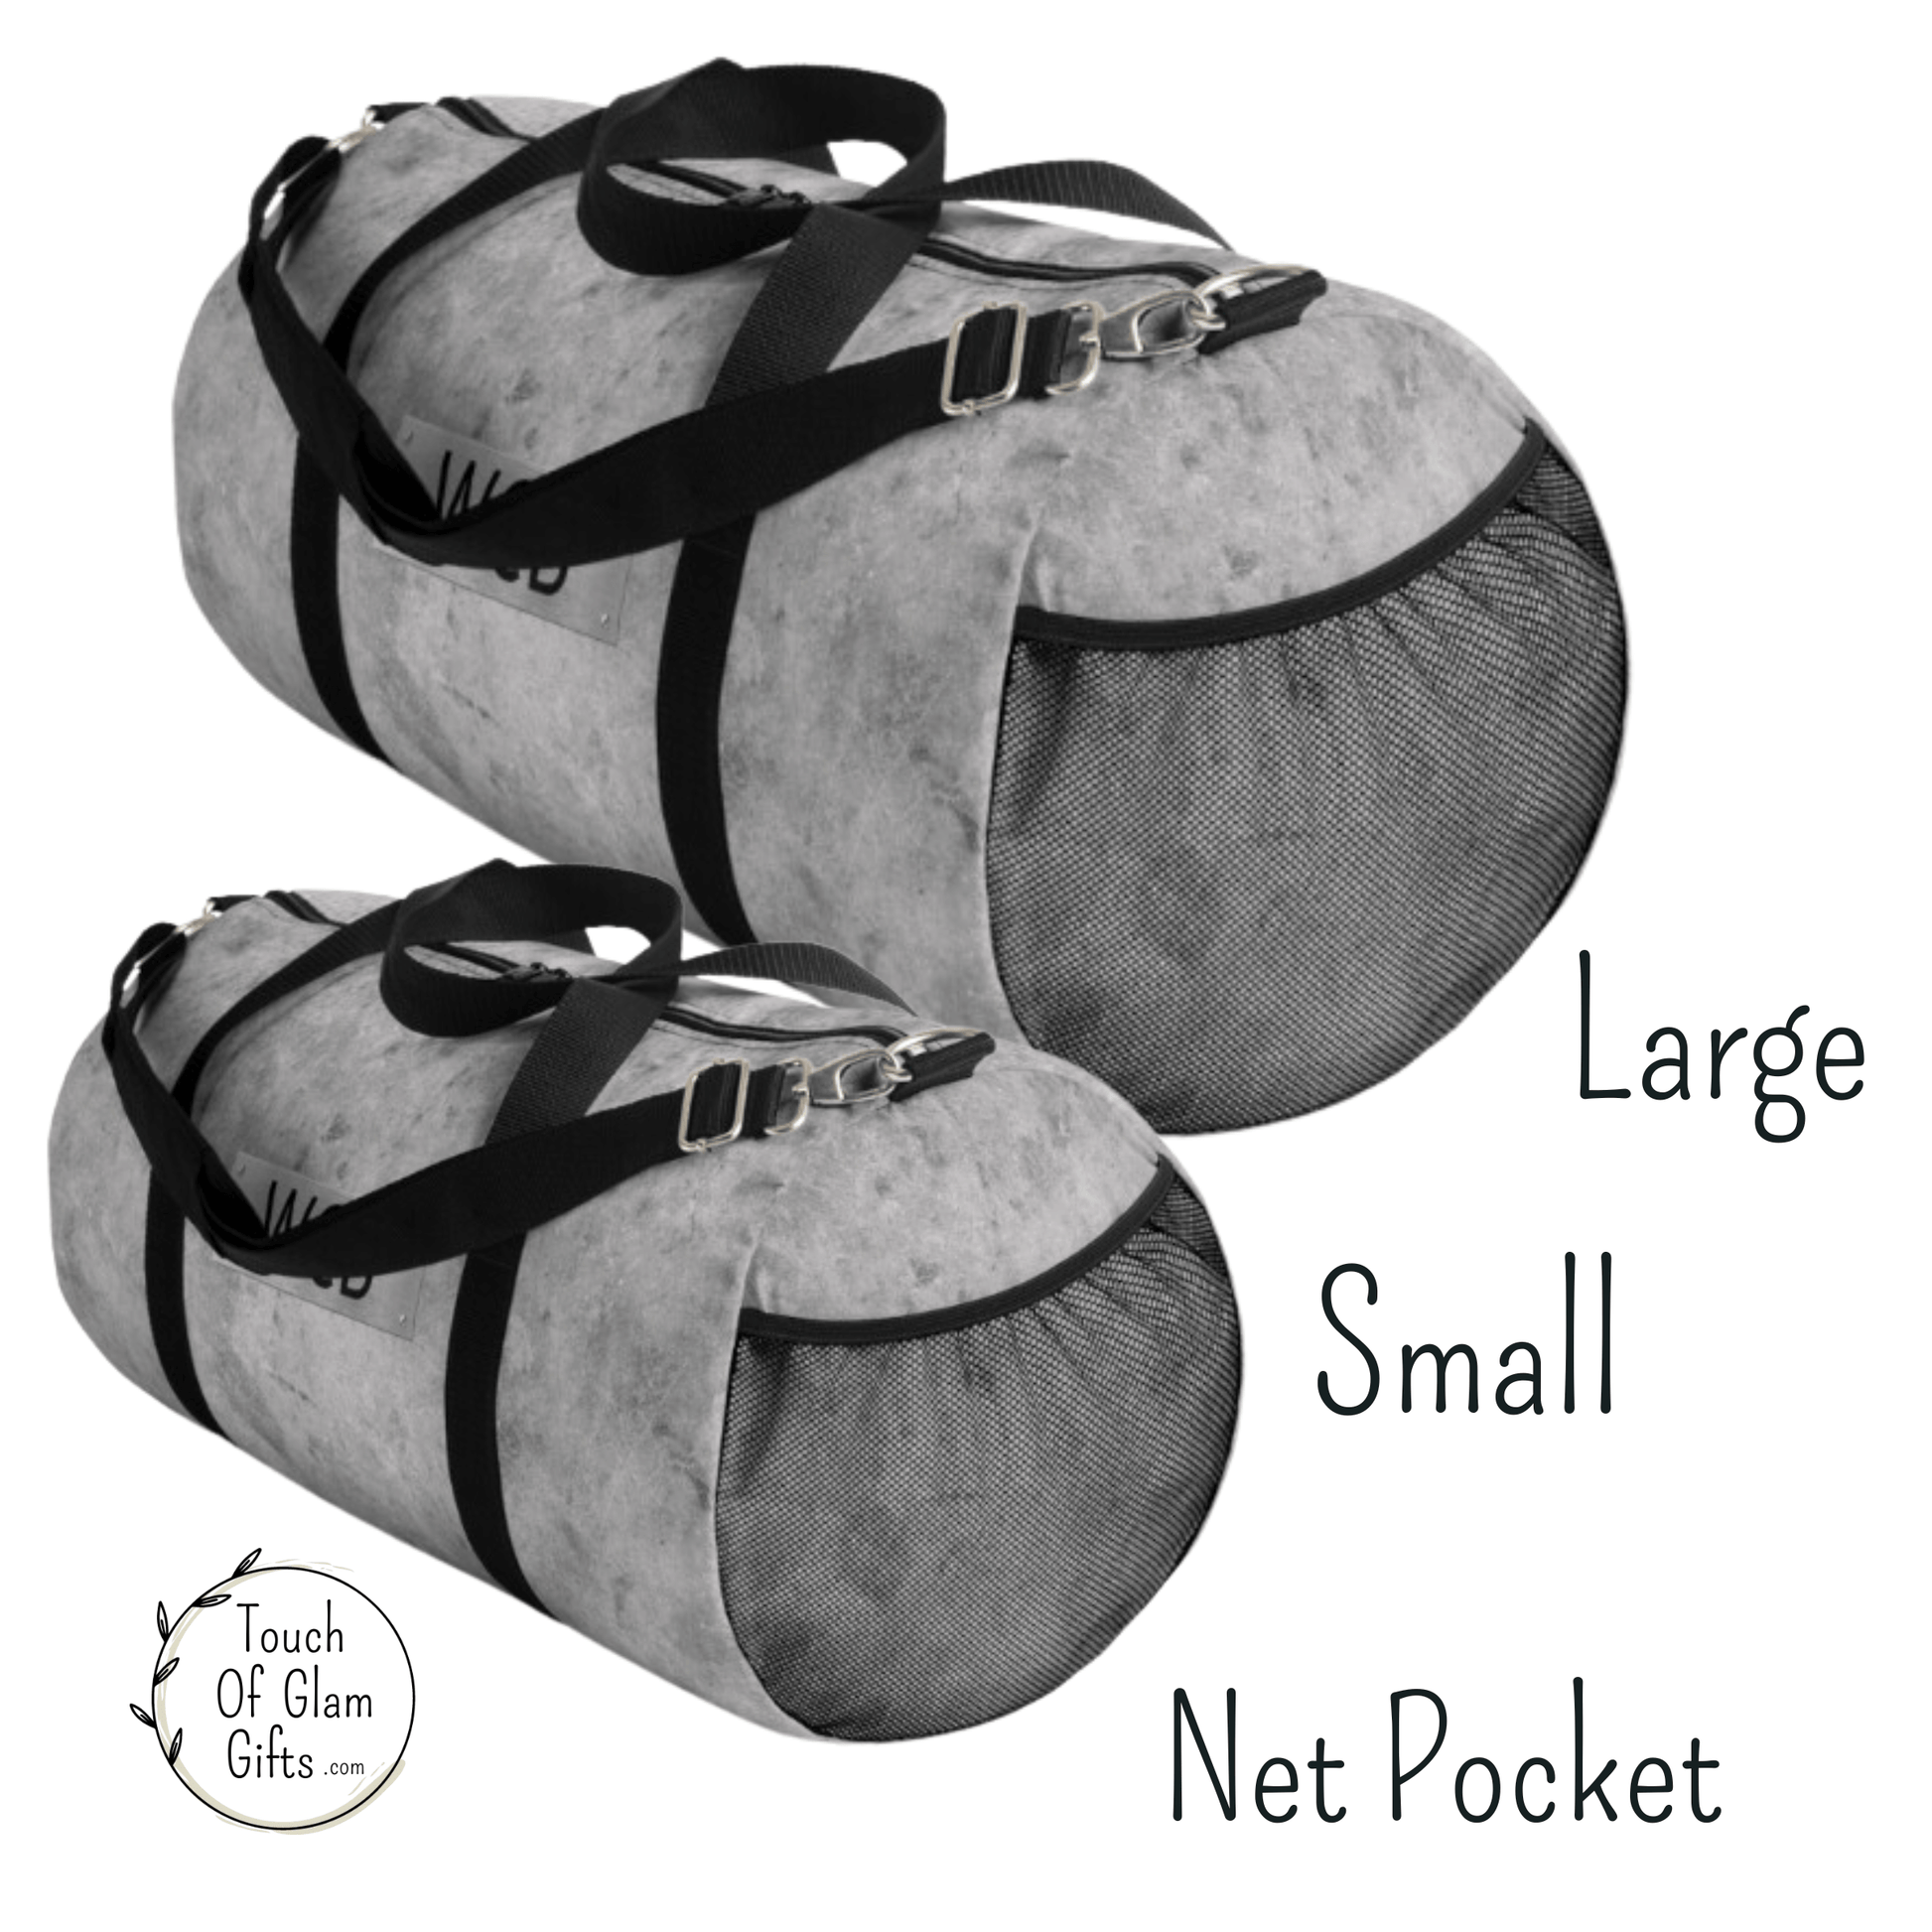 The left side of the grey canvas duffel bag has a netted sewn in pocket and the straps have metal clasps for extra durability.